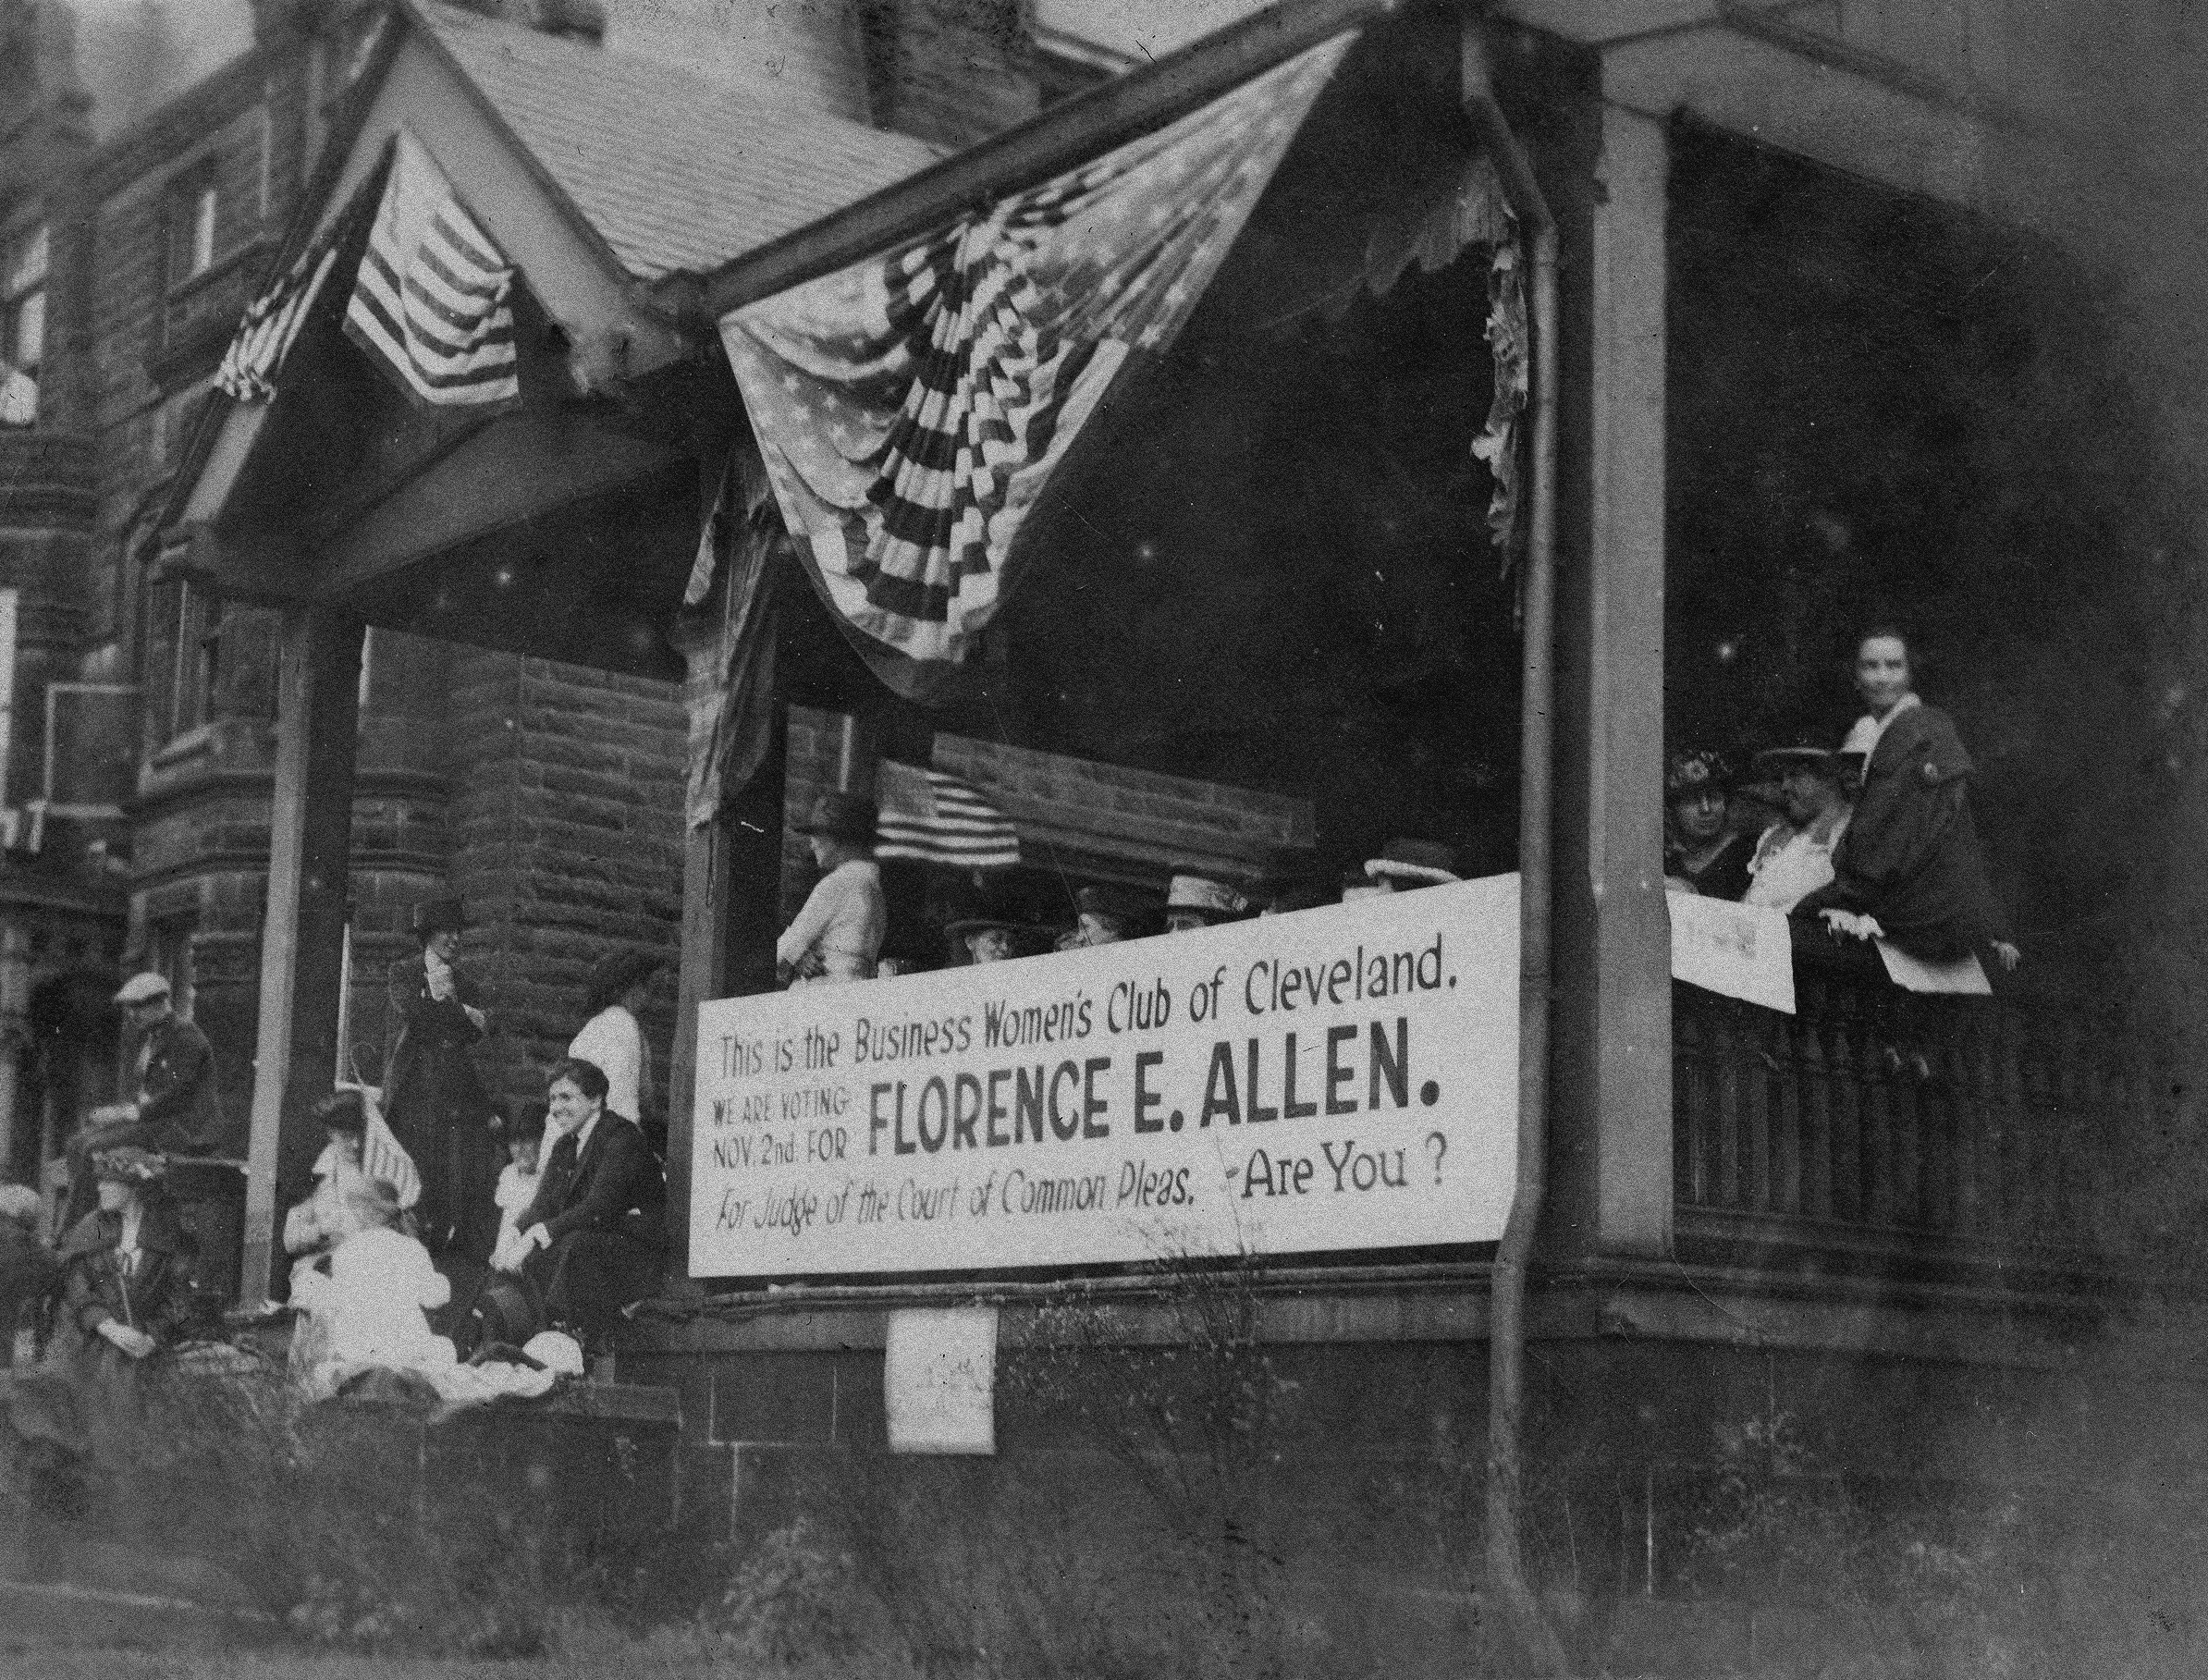 1920, Business Women's Club of Cleveland Campaign Signage in Support of Florence Allen Preview